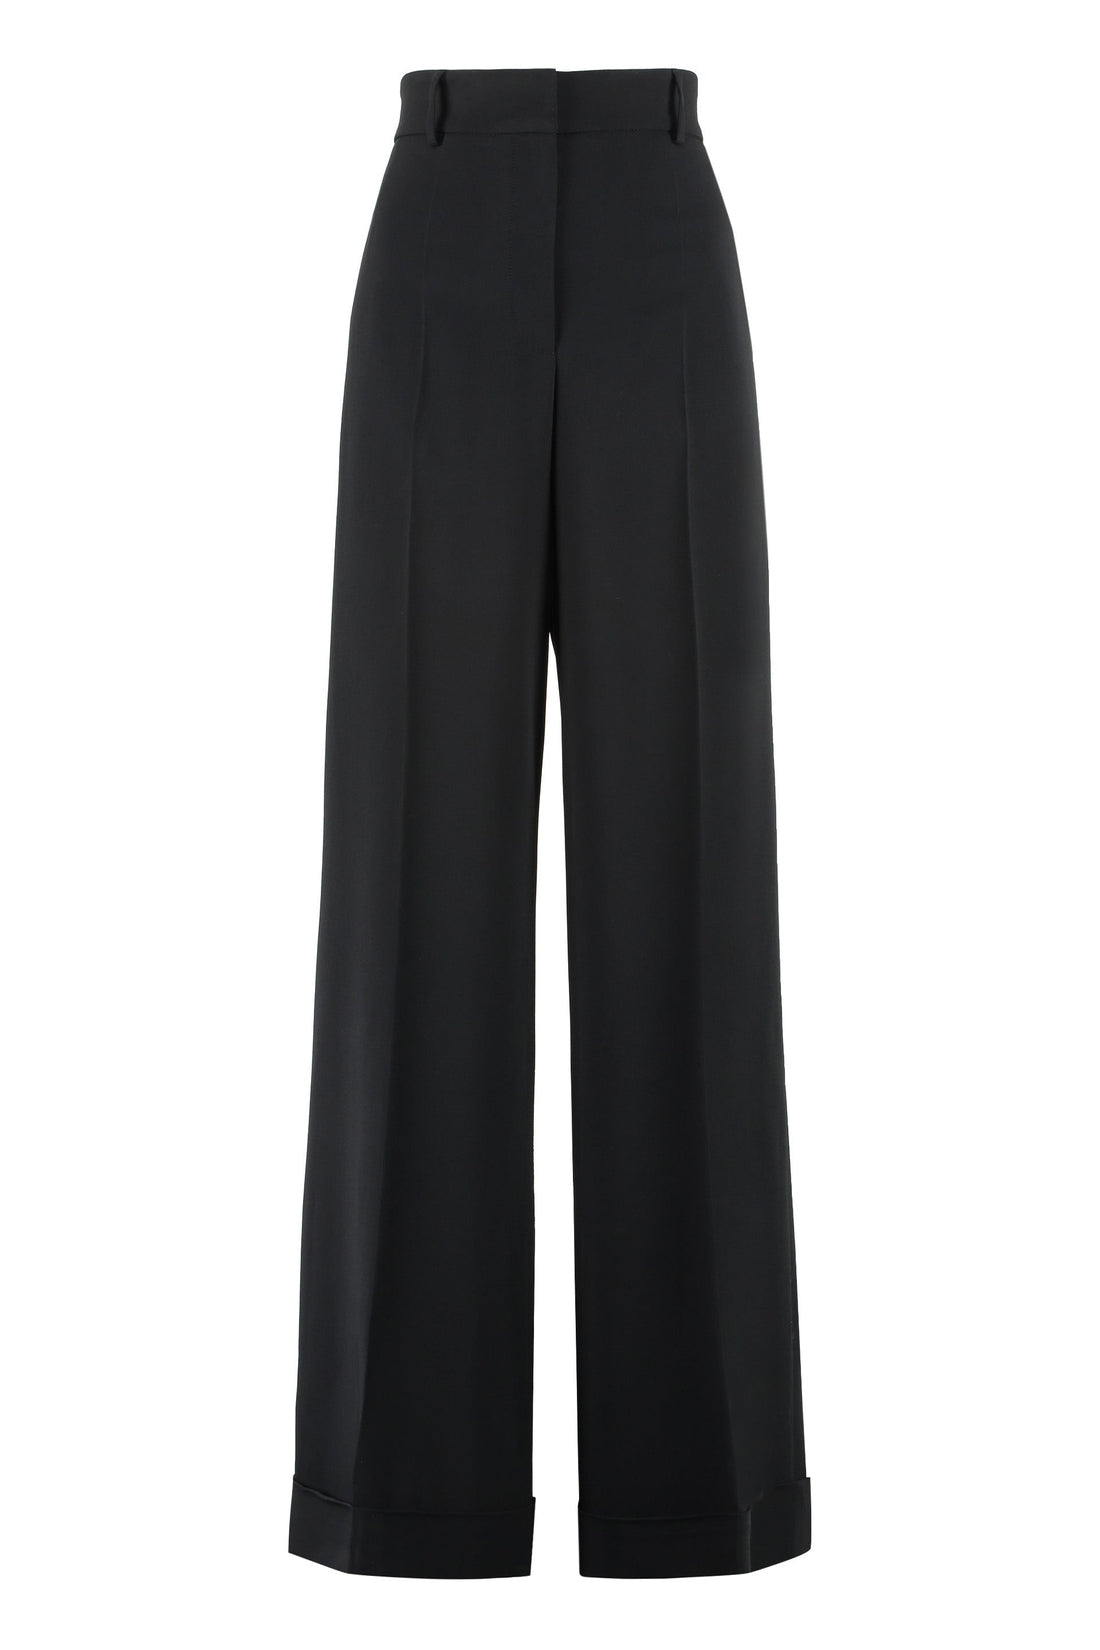 Moschino-OUTLET-SALE-High-waist wide-leg trousers-ARCHIVIST